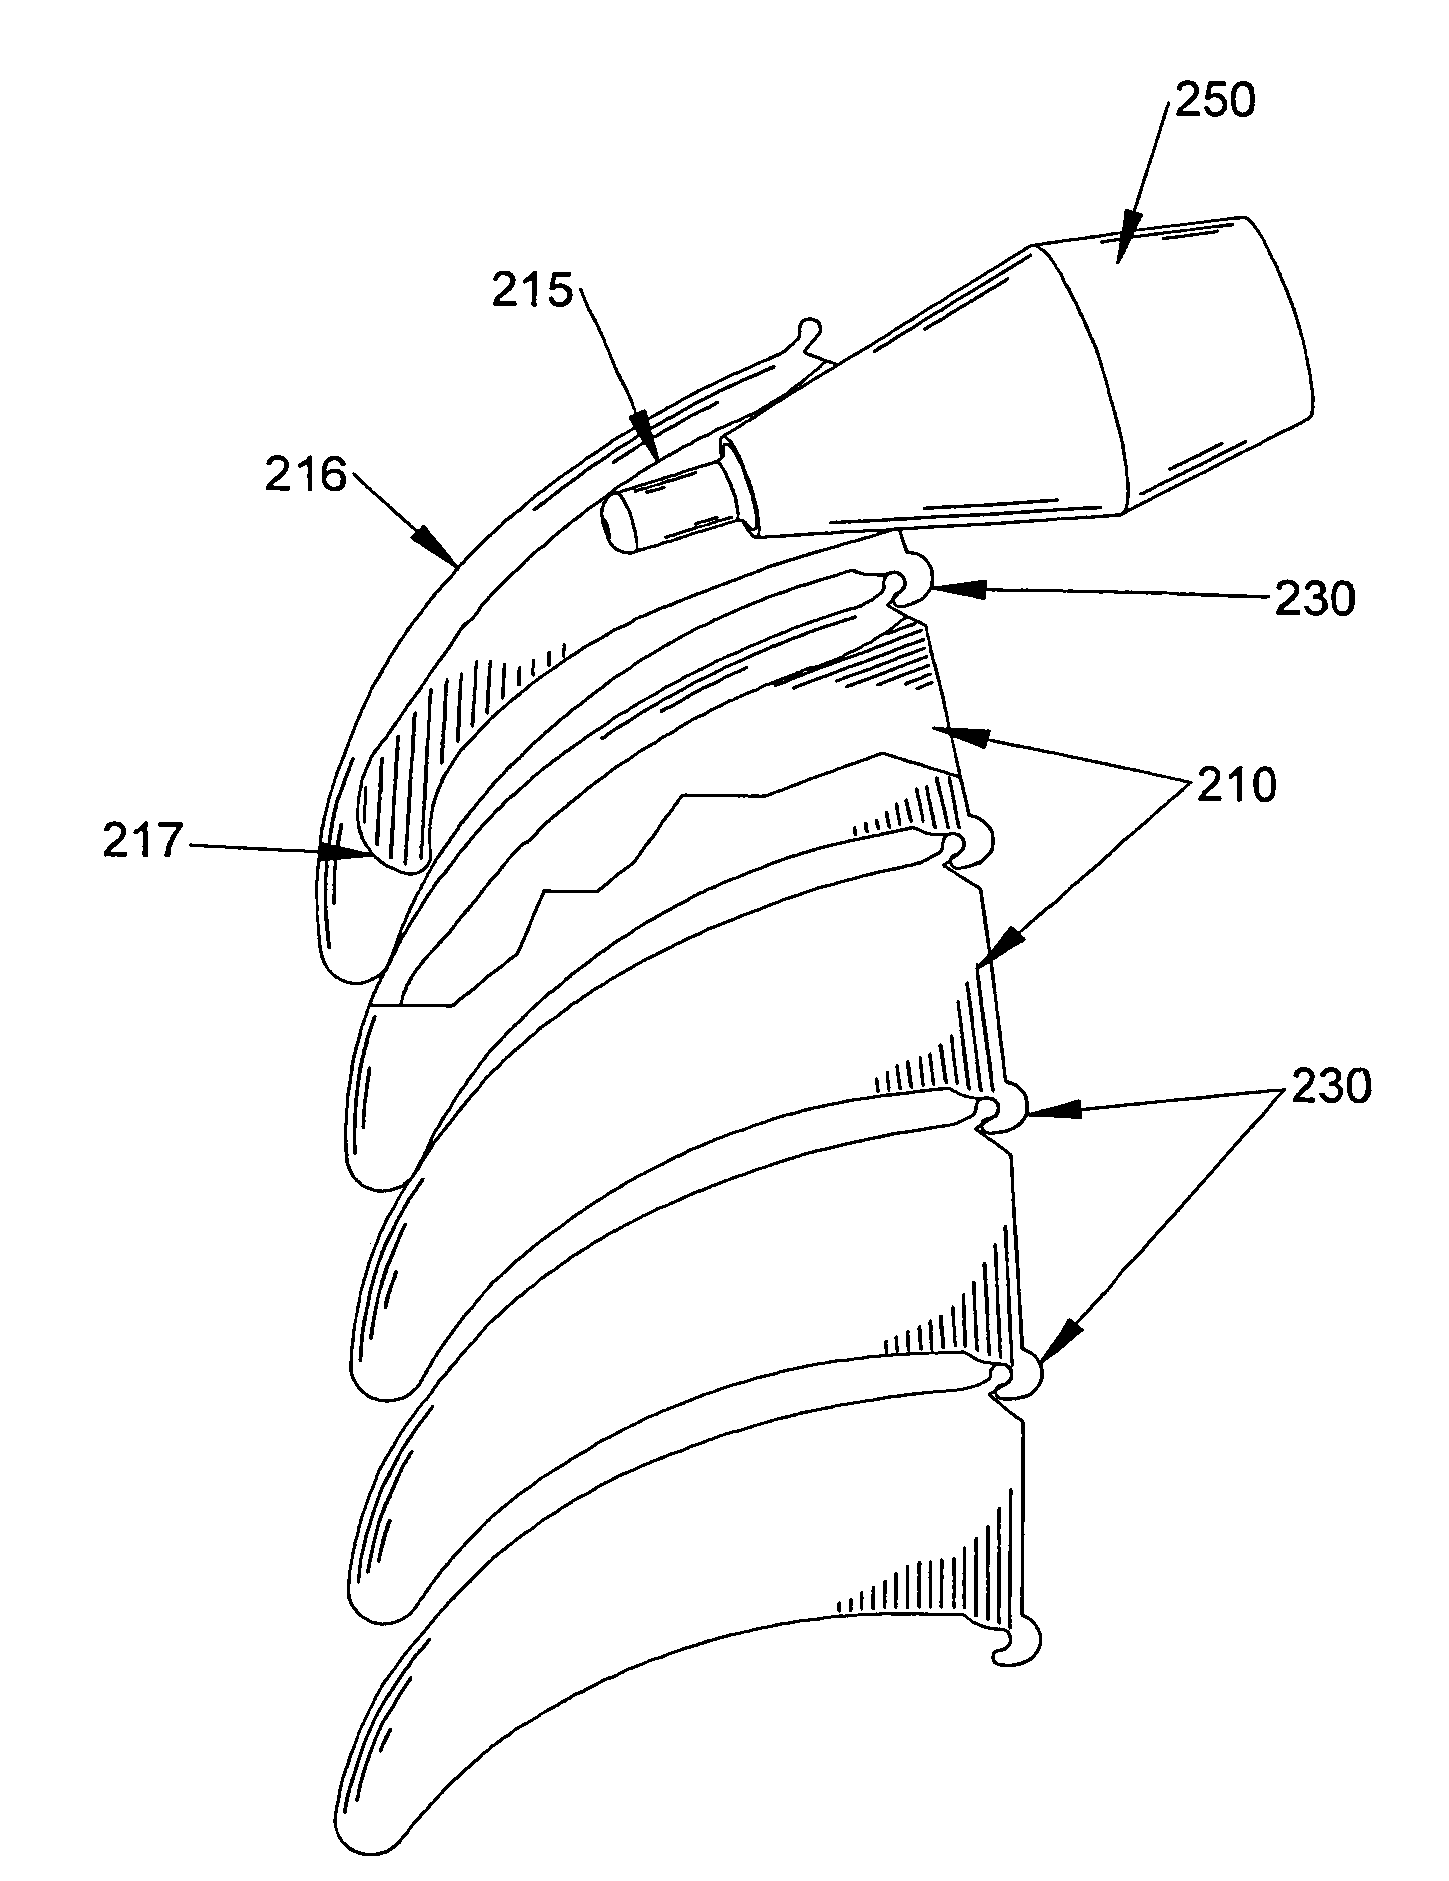 Enhanced light weight armor system with deflective operation